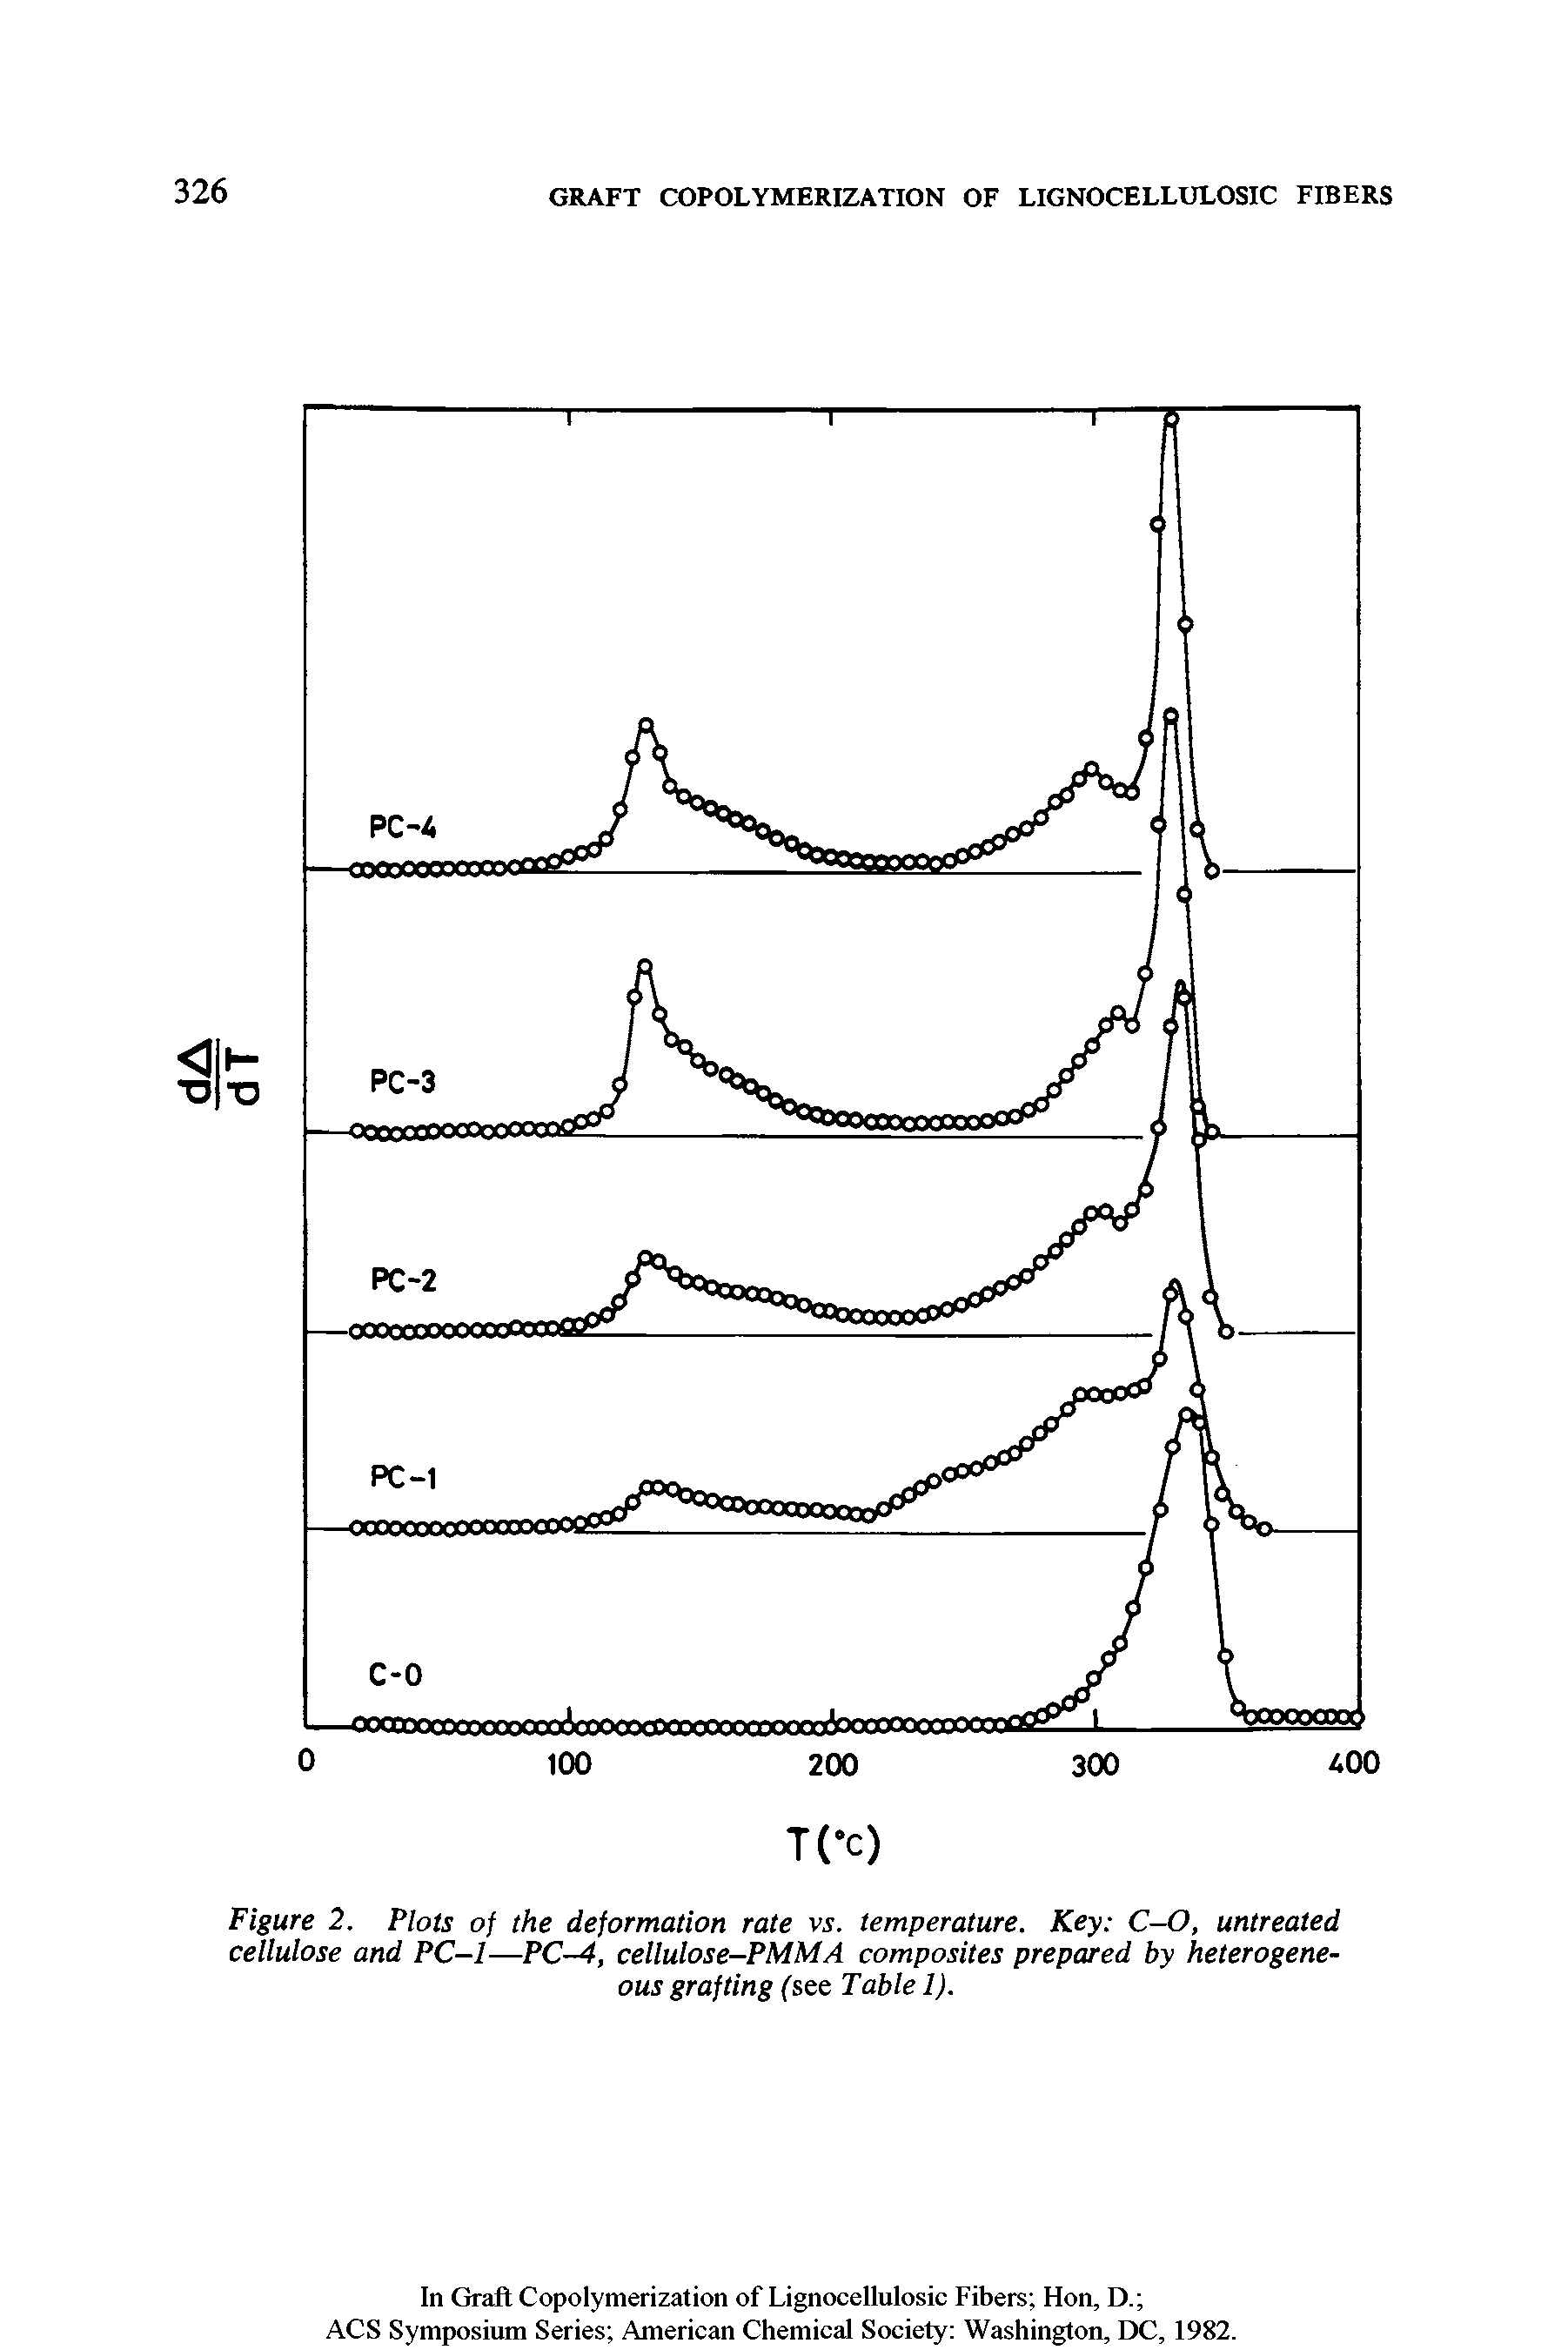 Figure 2. Plots of the deformation rate vs. temperature. Key C-O, untreated cellulose and PC-1—PC-4, cellulose-PMMA composites prepared by heterogeneous grafting (see Table 1).